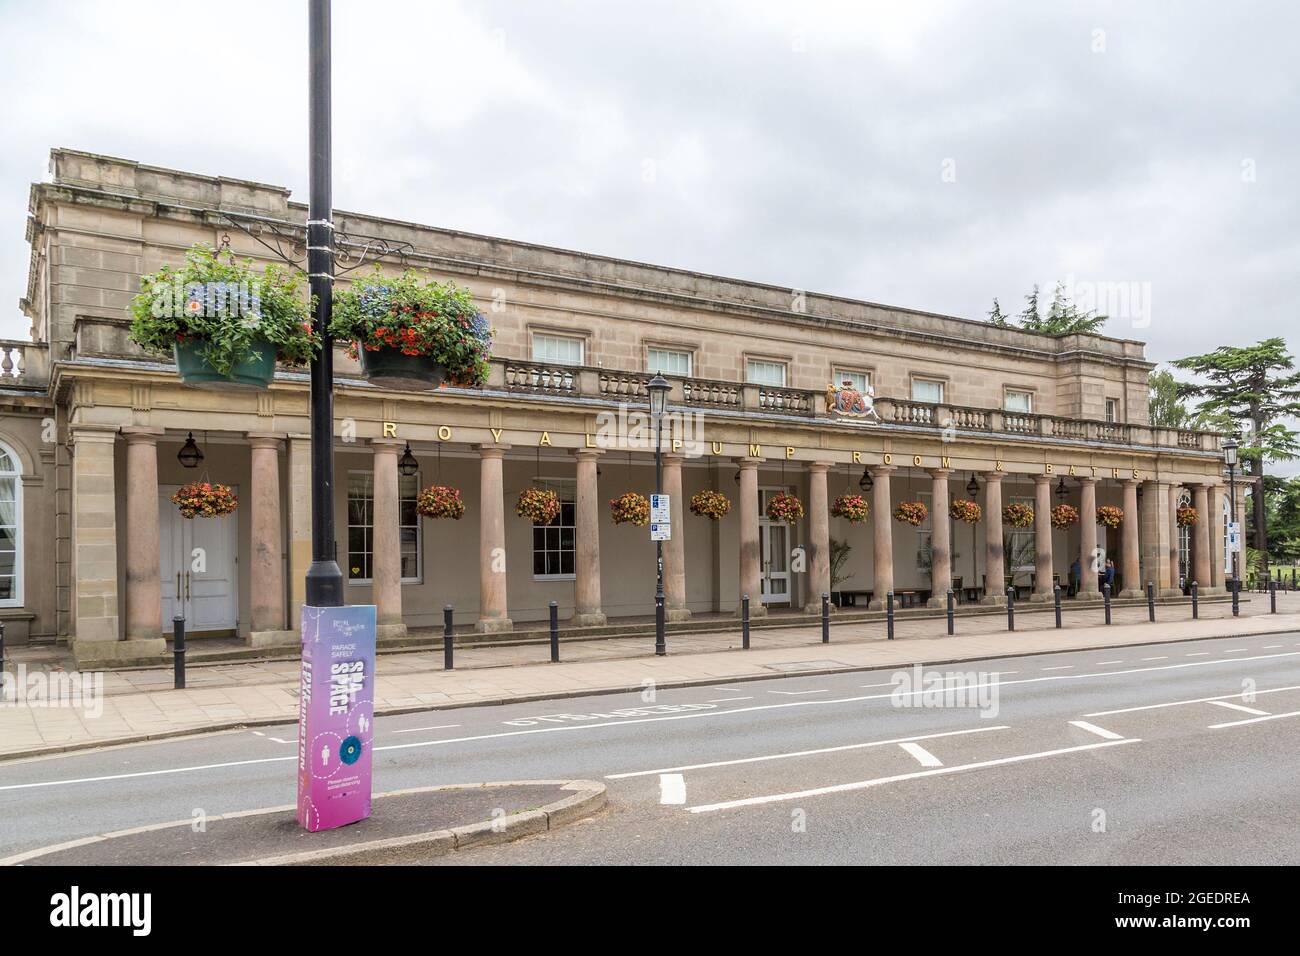 The Royal Pump Rooms is a cultural centre on the Parade in Leamington Spa, England. It was once the most famous of several spa baths in Leamington. Stock Photo